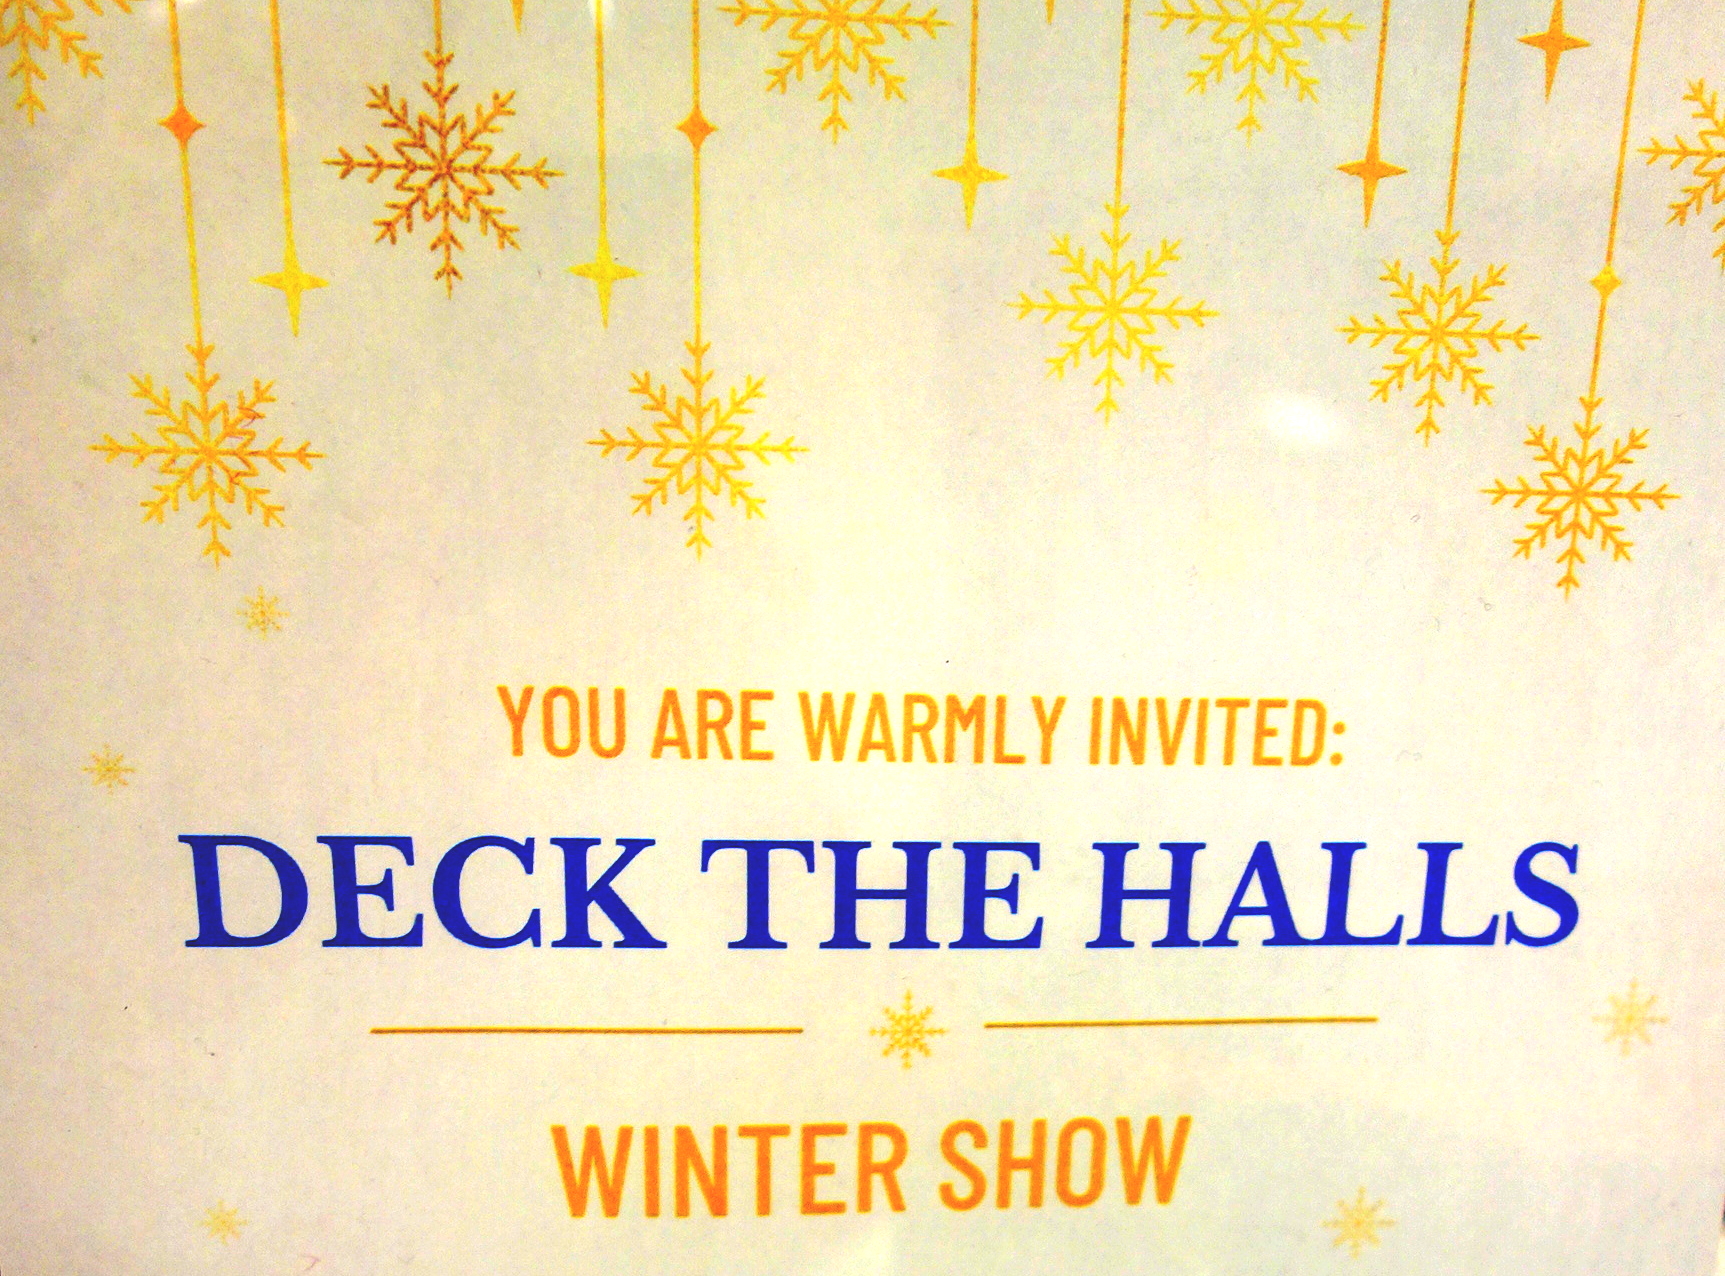 Deck the Halls Winter Show image from Active Adult Centre of Mississauga